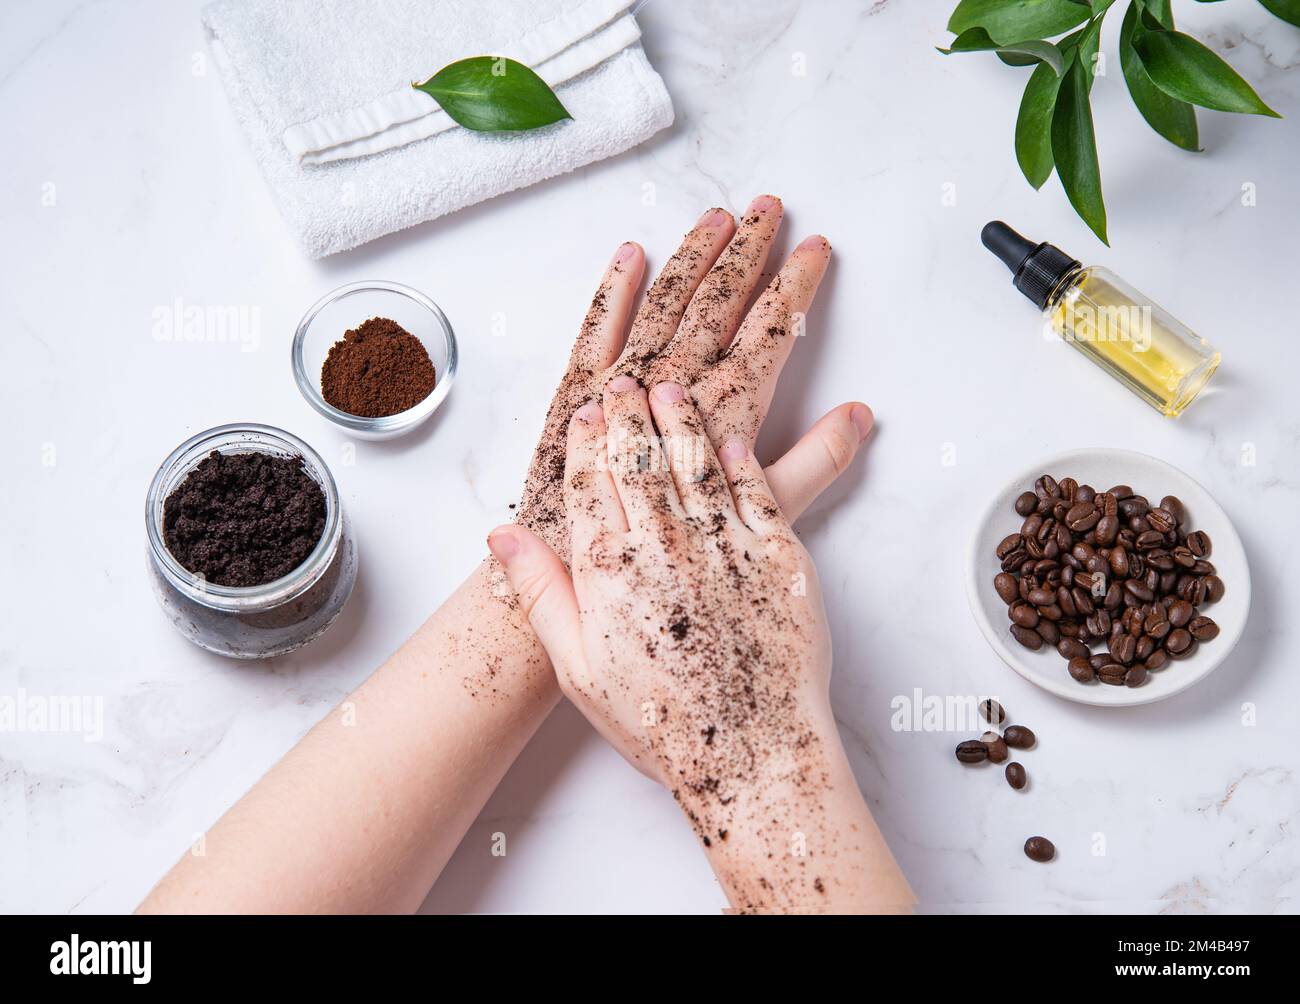 Home spa care for the skin of hands and nails. A young woman does a hand massage with a homemade coffee scrub with olive oil on marble background. Top Stock Photo